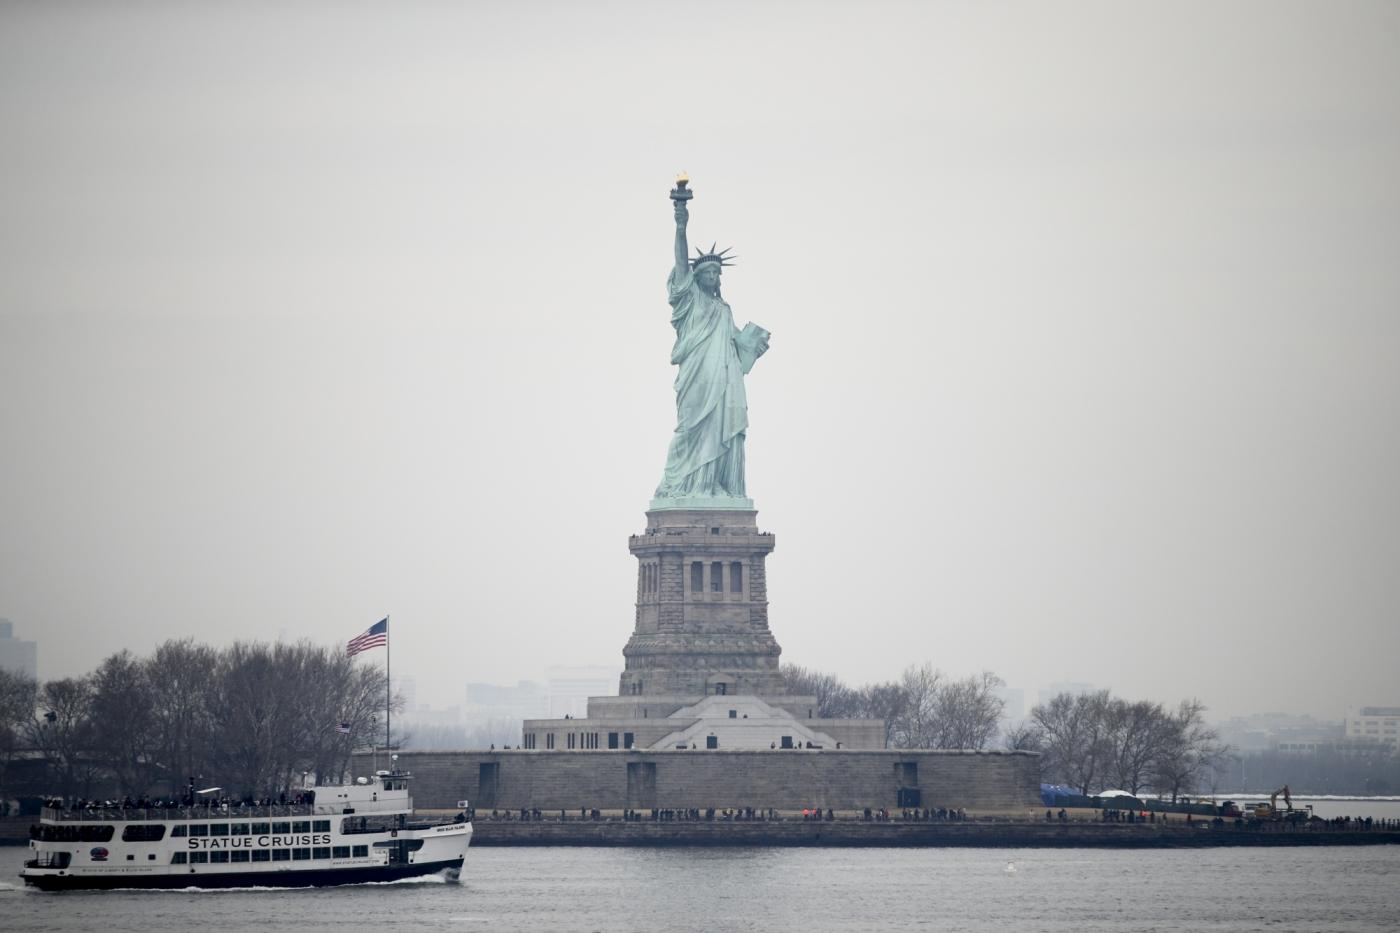 NEW YORK, Jan. 22, 2018 (Xinhua) -- Tourists visit the Statue of Liberty on Liberty Island in New York, the United States, Jan. 22, 2018. New York City's iconic landmark the Statue of Liberty reopened Monday at the expense of state funds following a brief closure as a result of the U.S. federal government shutdown. According to a news release published on New York State Governor Andrew Cuomo's website, the cost of keeping the Statue of Liberty National Monument and Ellis Island open is 65,000 U.S. dollars per day. (Xinhua/Wang Ying/IANS) by .